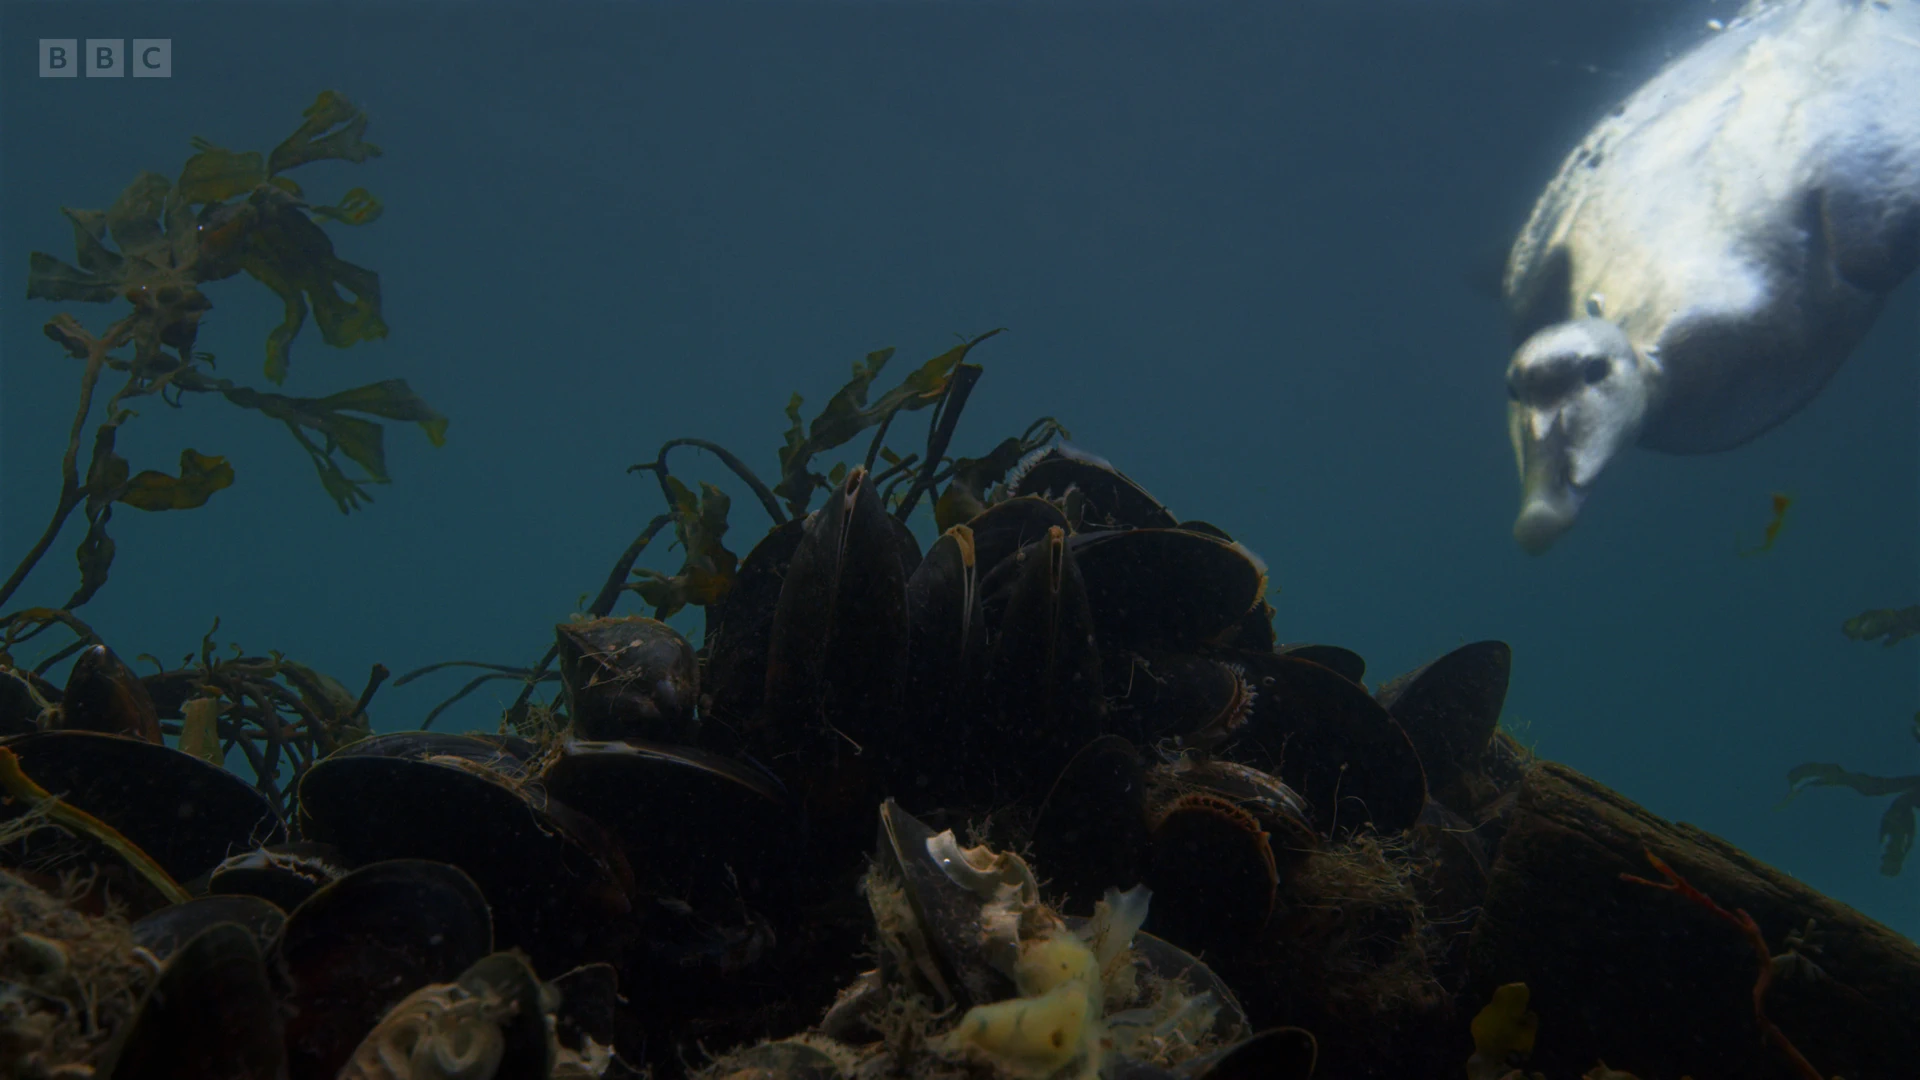 Blue mussel (Mytilus edulis) as shown in A Perfect Planet - Oceans